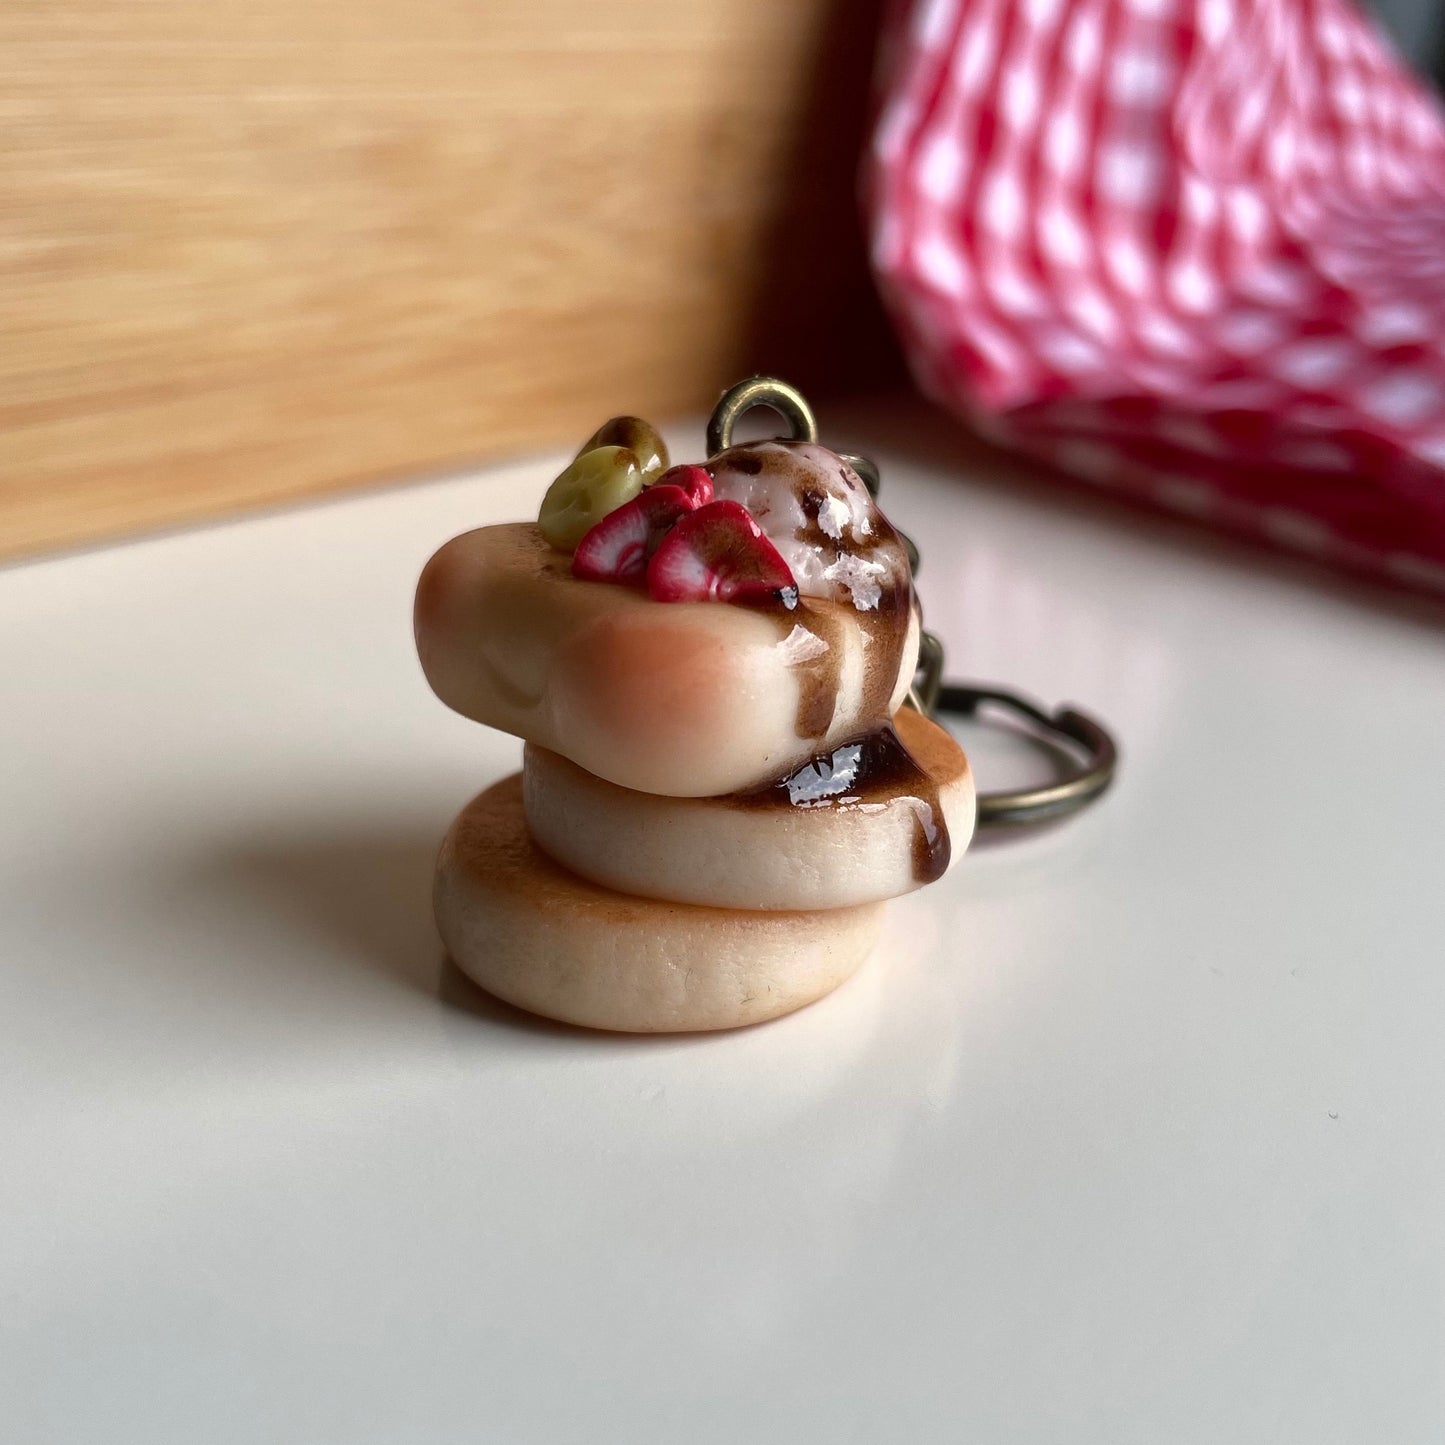 Stacked pancakes keychain, cute pancakes charm, pancakes keyring, novelty keychain, polymerclay charm,clay keyring, miniature realistic food